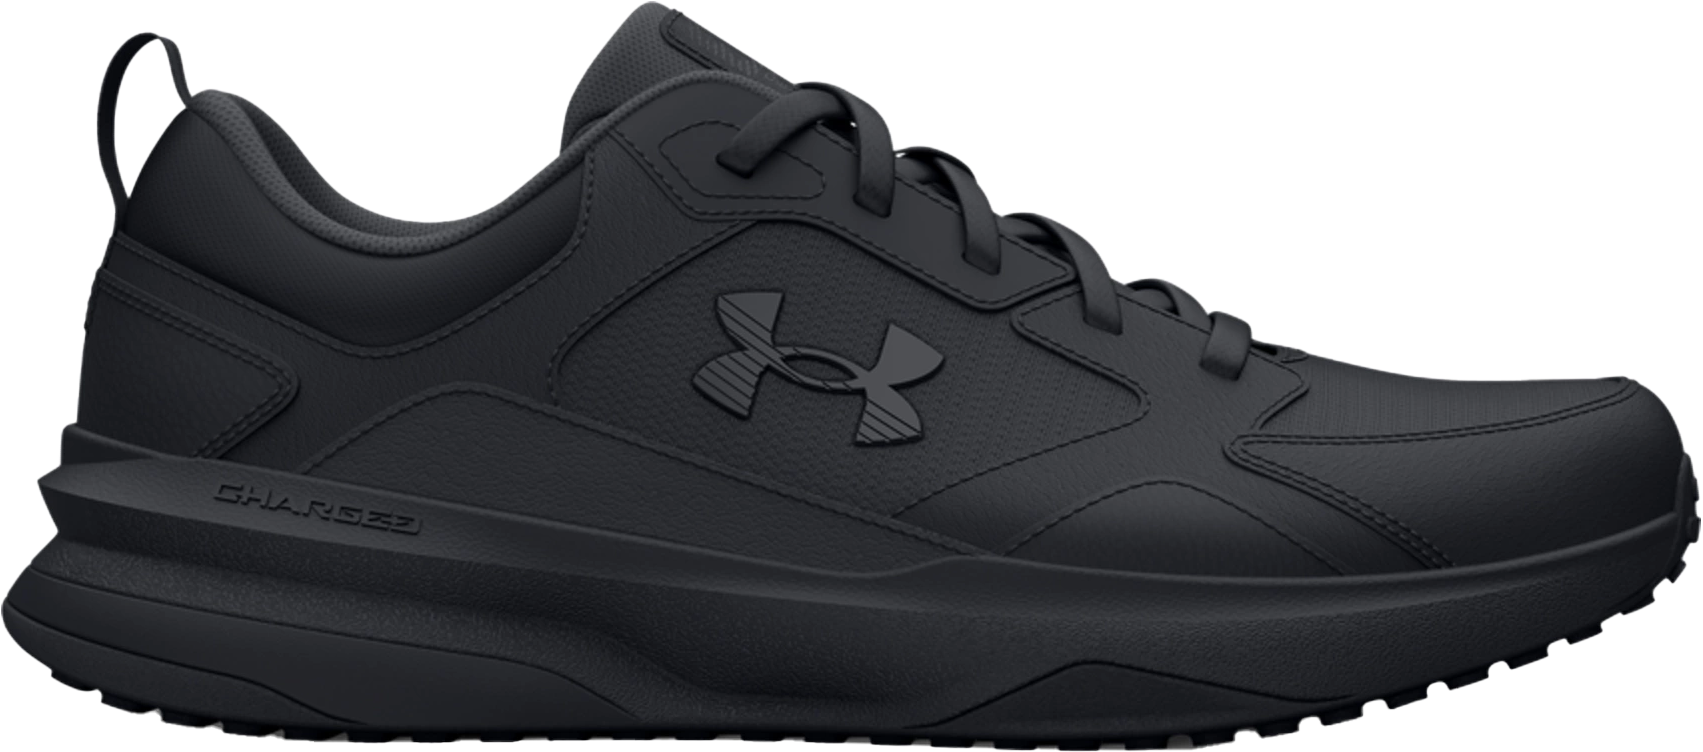 Tenisice za trening Under Armour UA Charged Edge-BLK